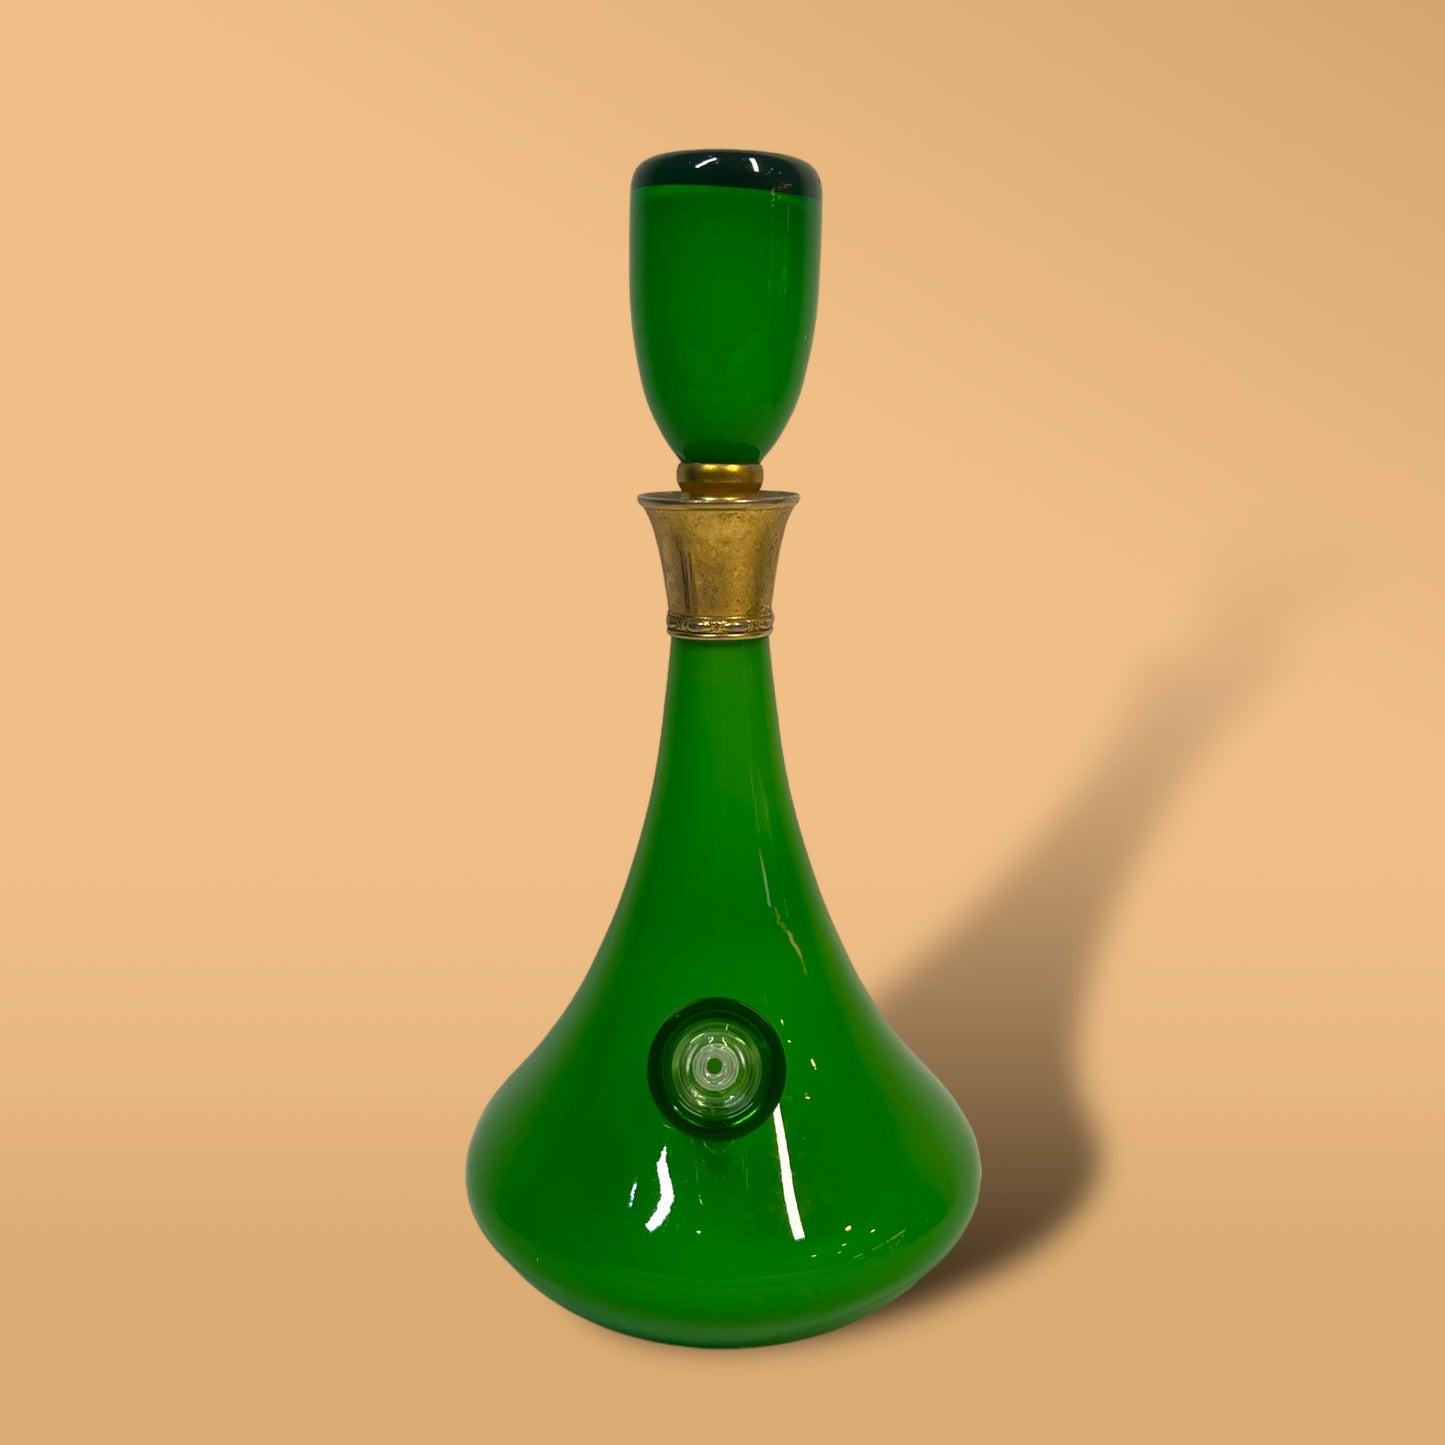 Cased Victorian Green Rose Decanter (Flawed Topper)